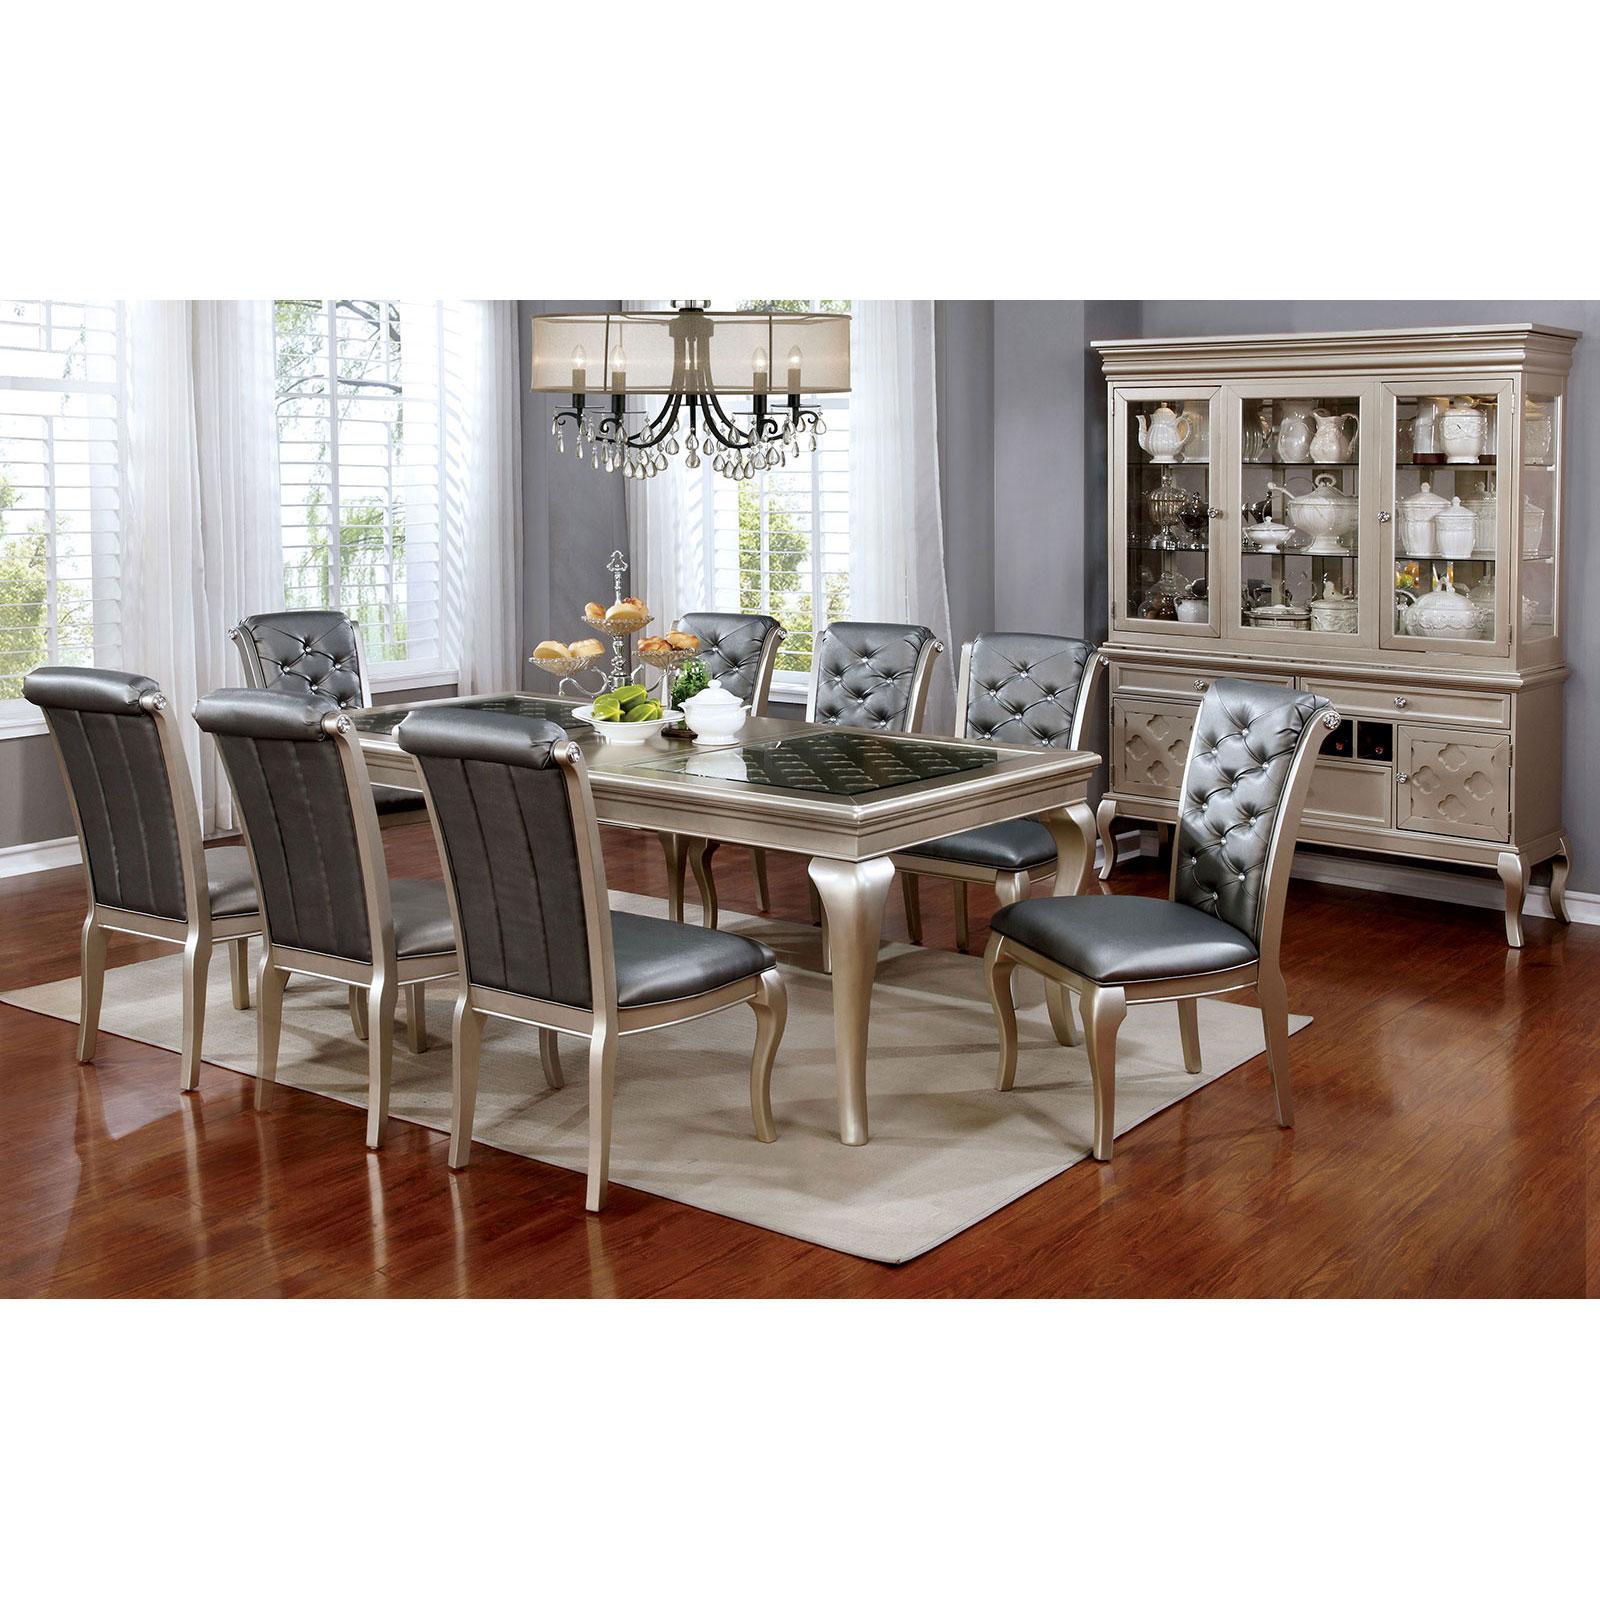 Furniture of America AMINA CM3219T Dining Table